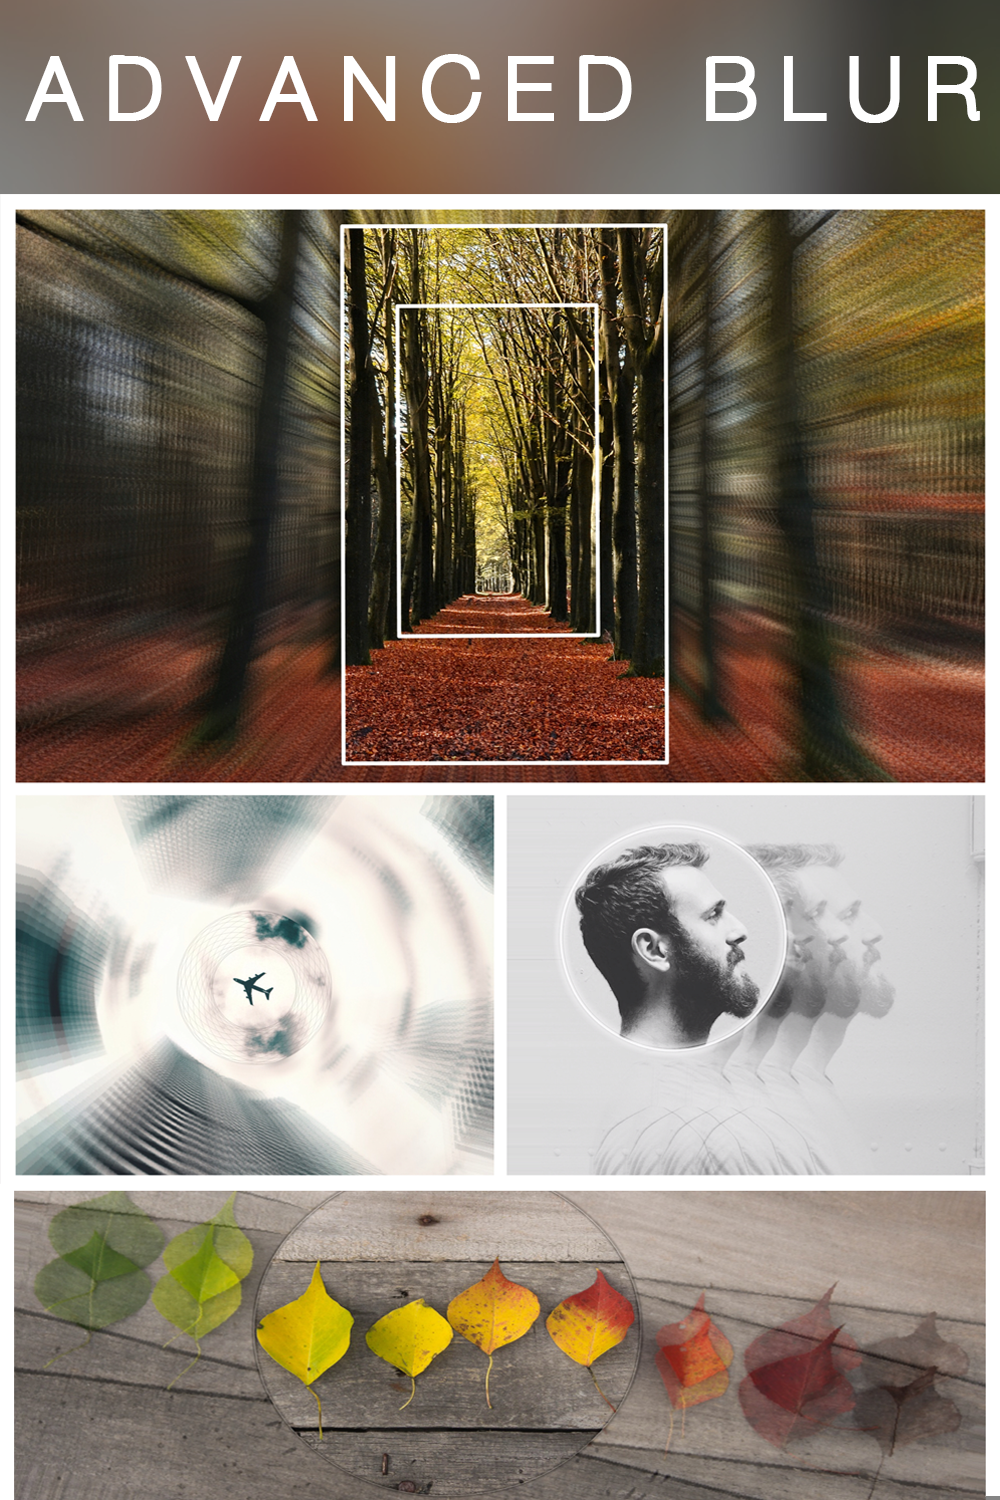 overam uses geometry to reshape photo editing on android advanced blur